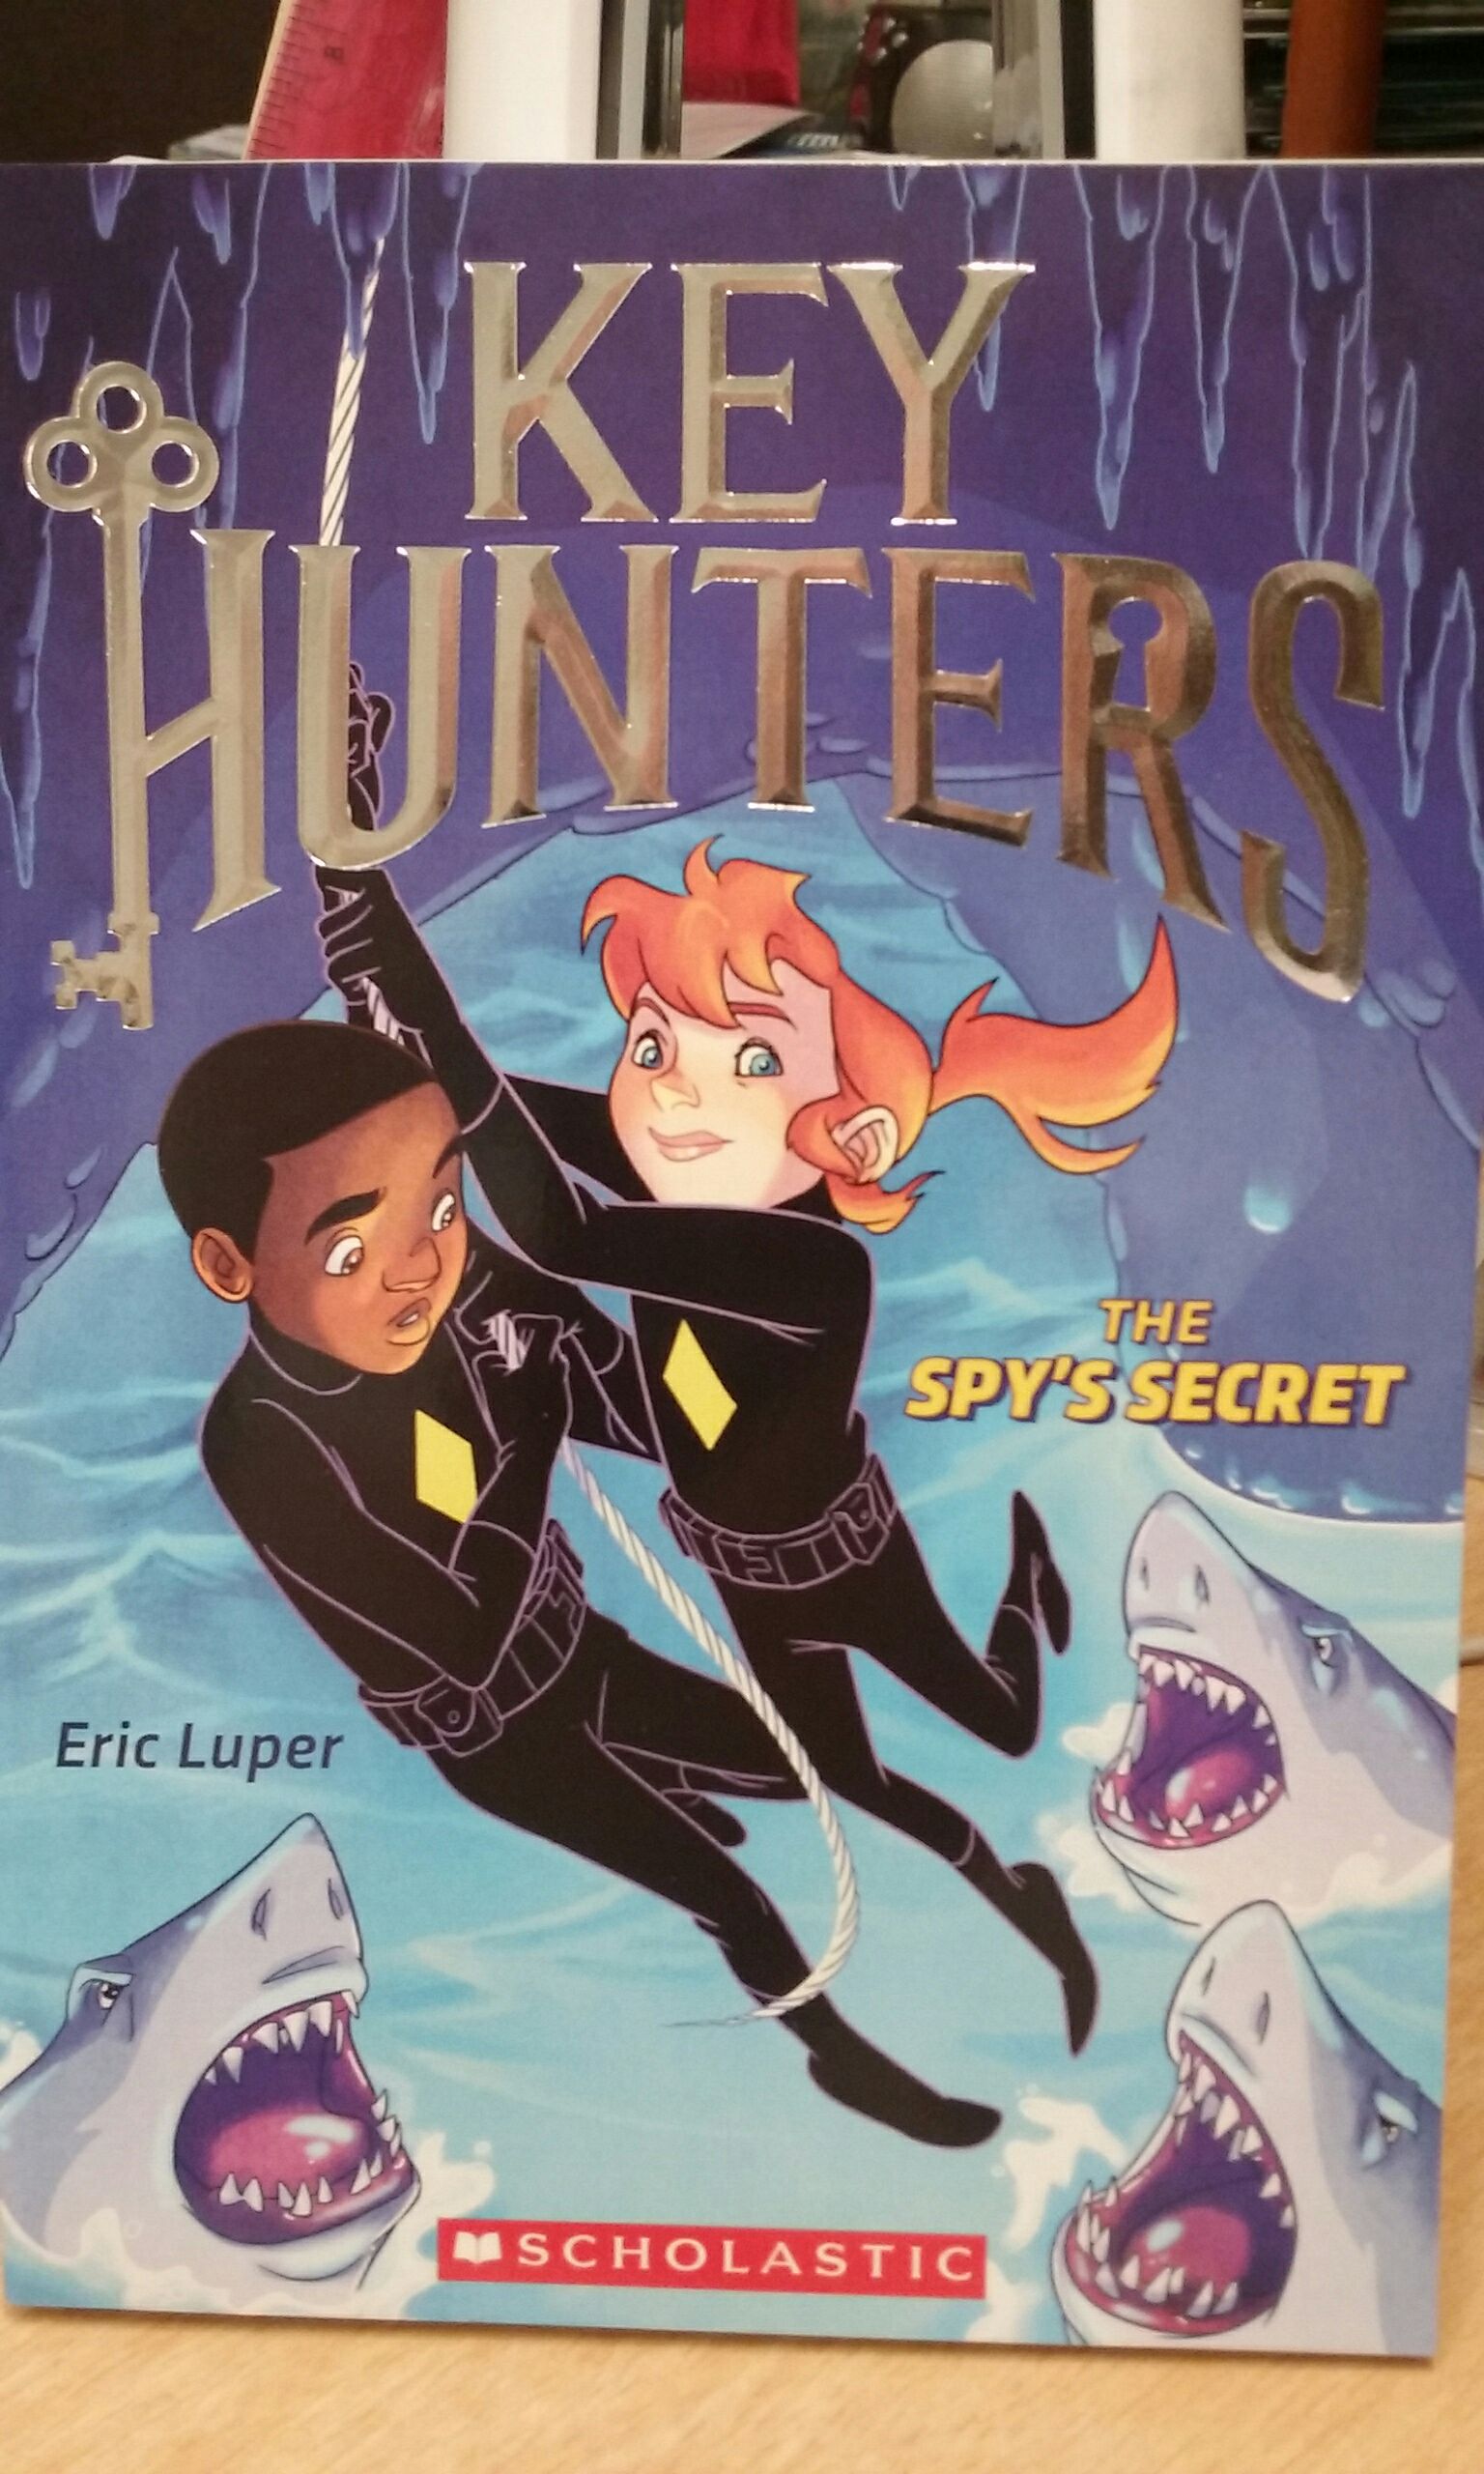 Key Hunters #2 The Spy’s Secret - Eric Luper book collectible [Barcode 9780545822060] - Main Image 1